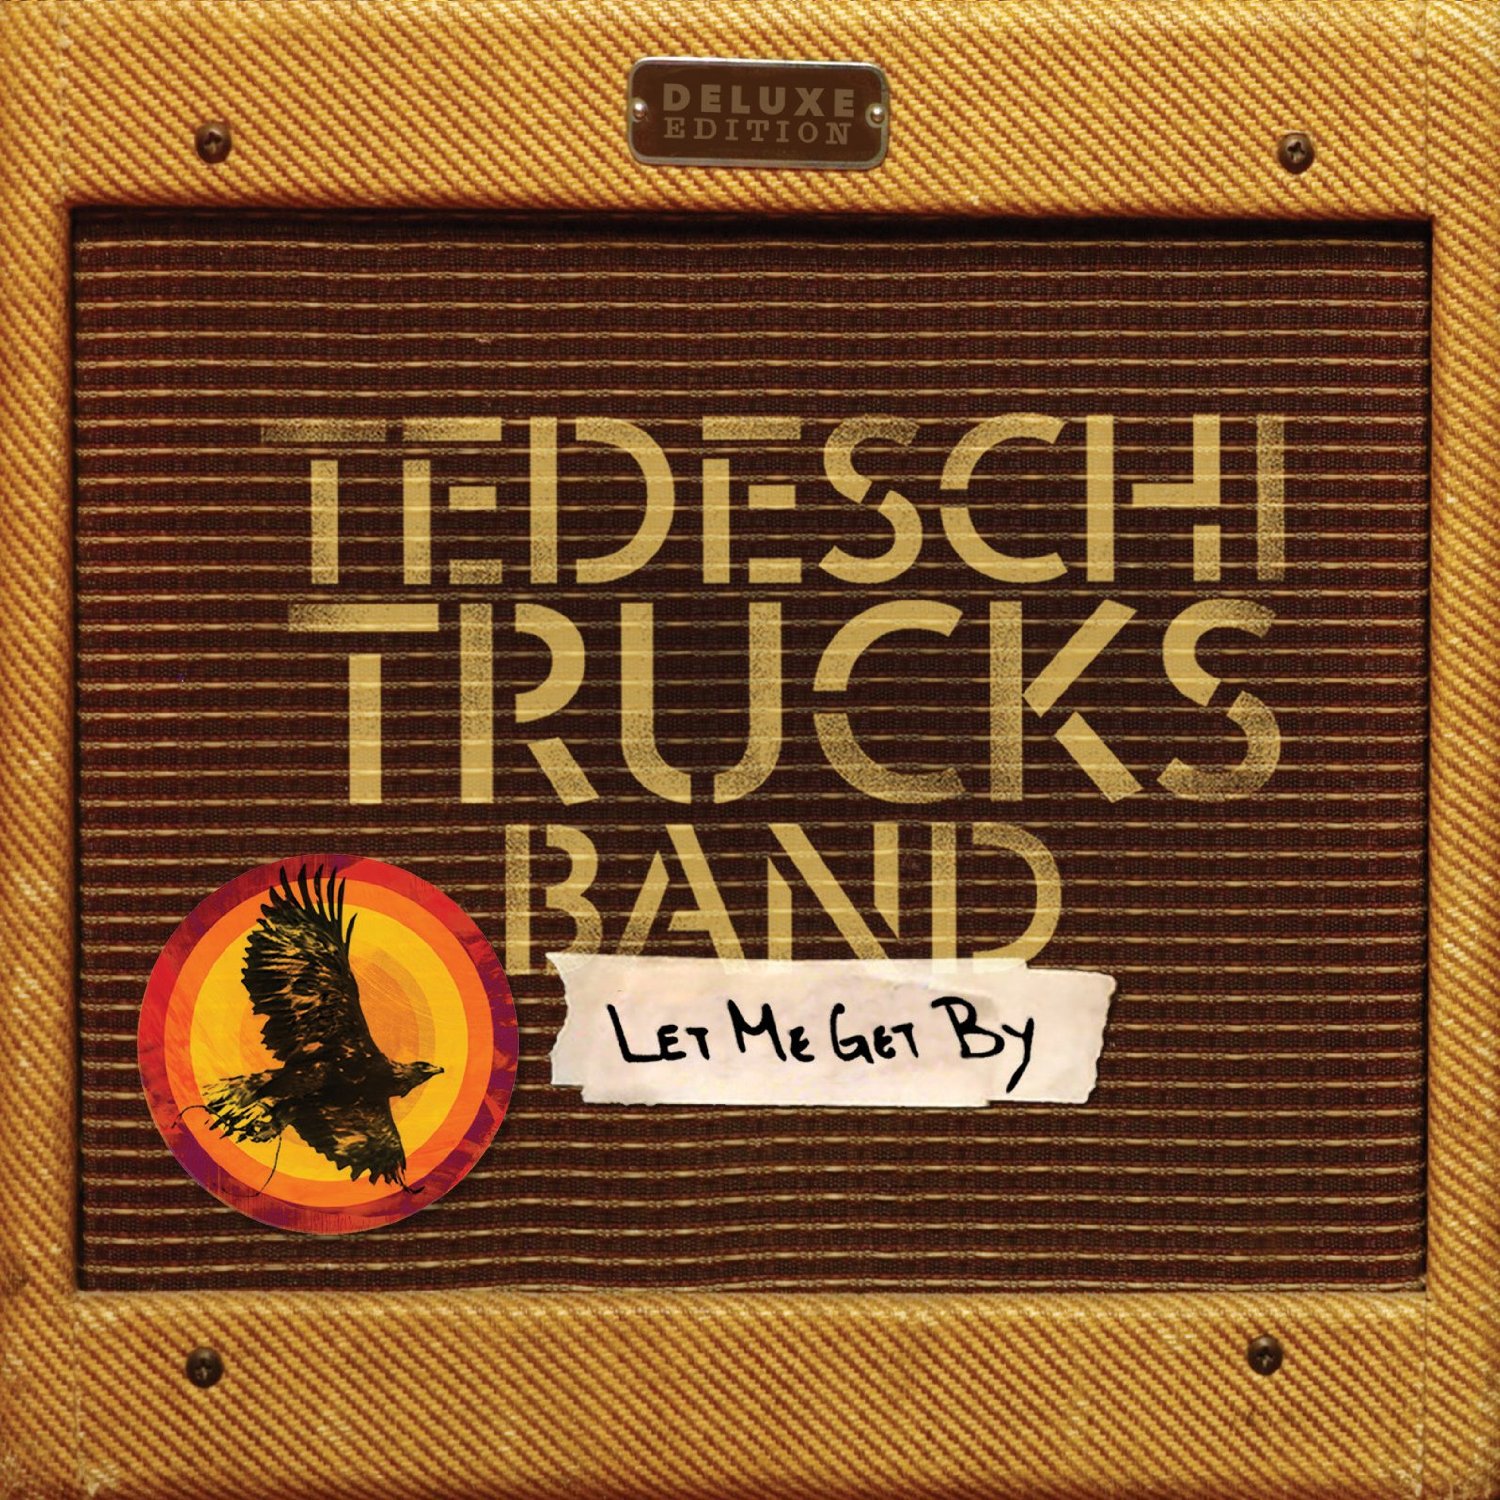 Tedeschi Trucks Band - Let Me Get By {Deluxe Edition} (2016) [FLAC 24bit/88,2kHz]